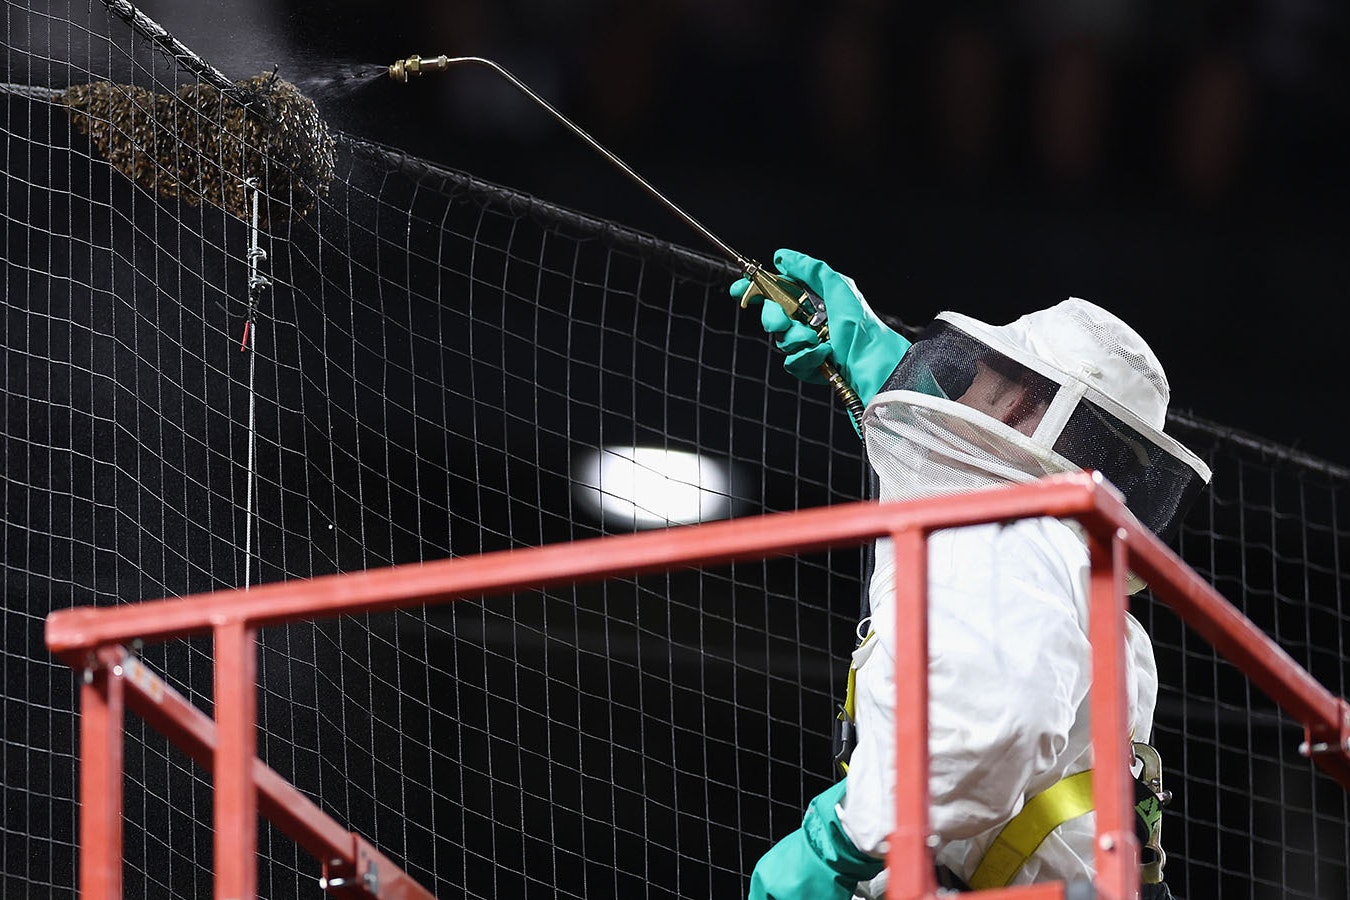 Beekeeper Matt Hilton removes a colony of bees that formed on the net behind home plate during a delay to the MLB game between the Los Angeles Dodgers and the Arizona Diamondbacks at Chase Field on April 30, 2024, in Phoenix, Arizona.